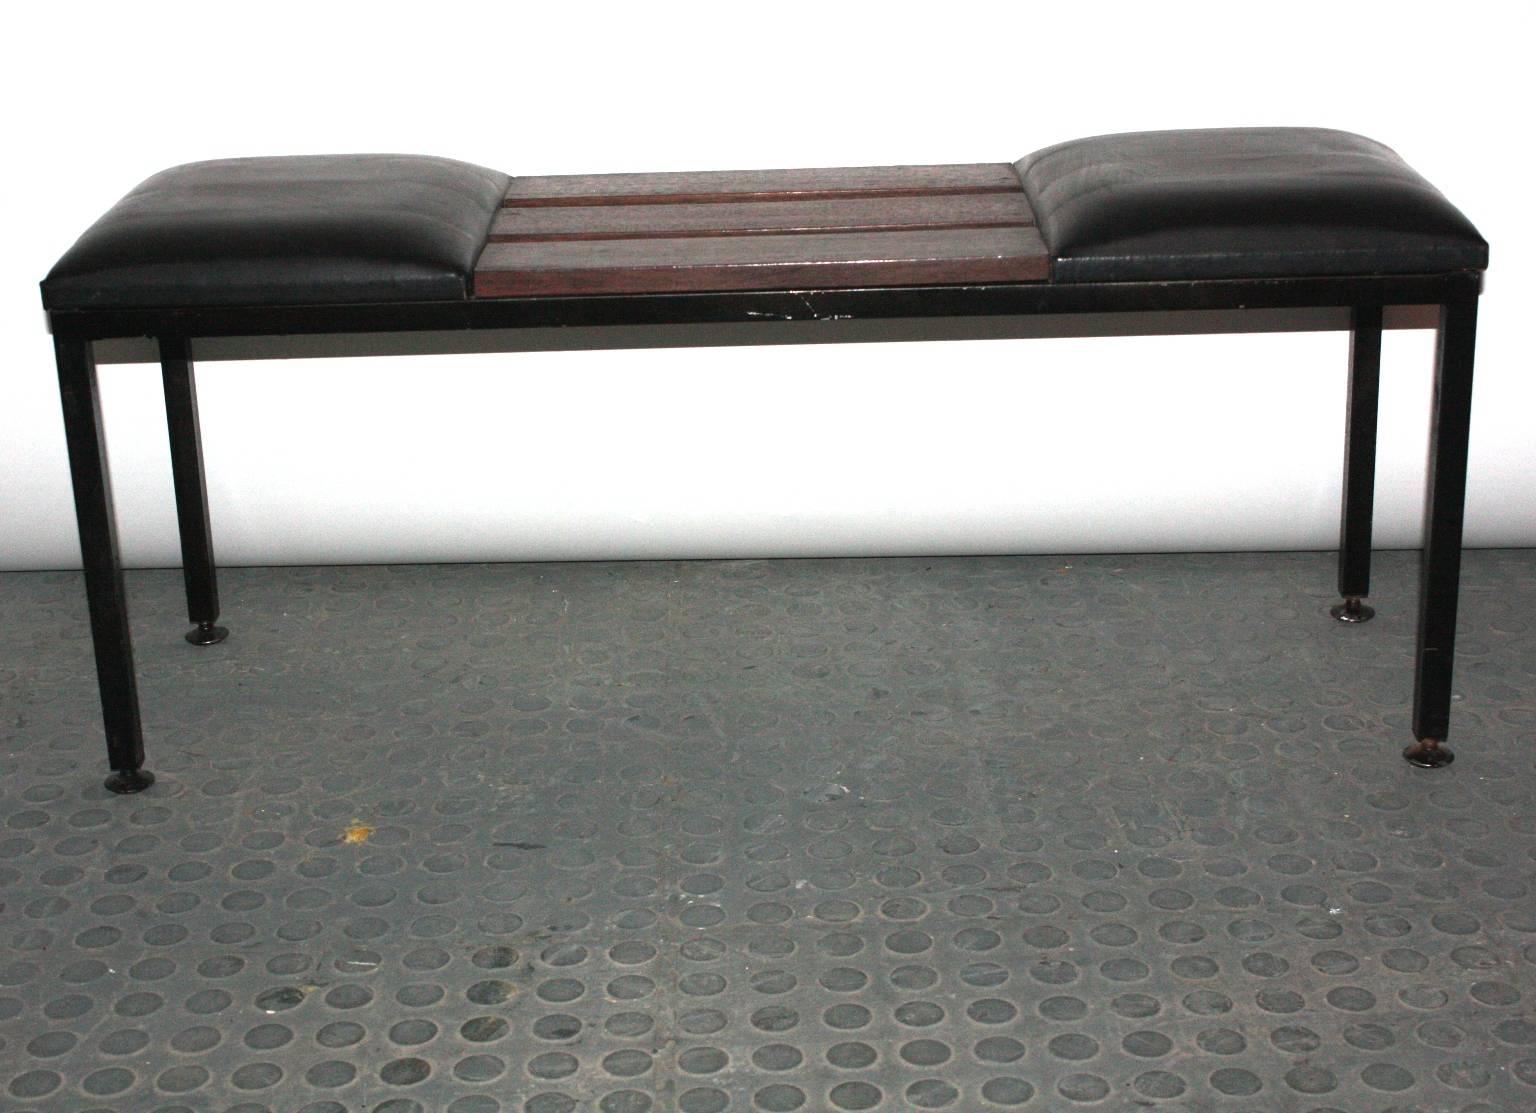 An Italian 1950 bench on black painted metal frame and three stripes in mahogany with attached two black leather cushions.